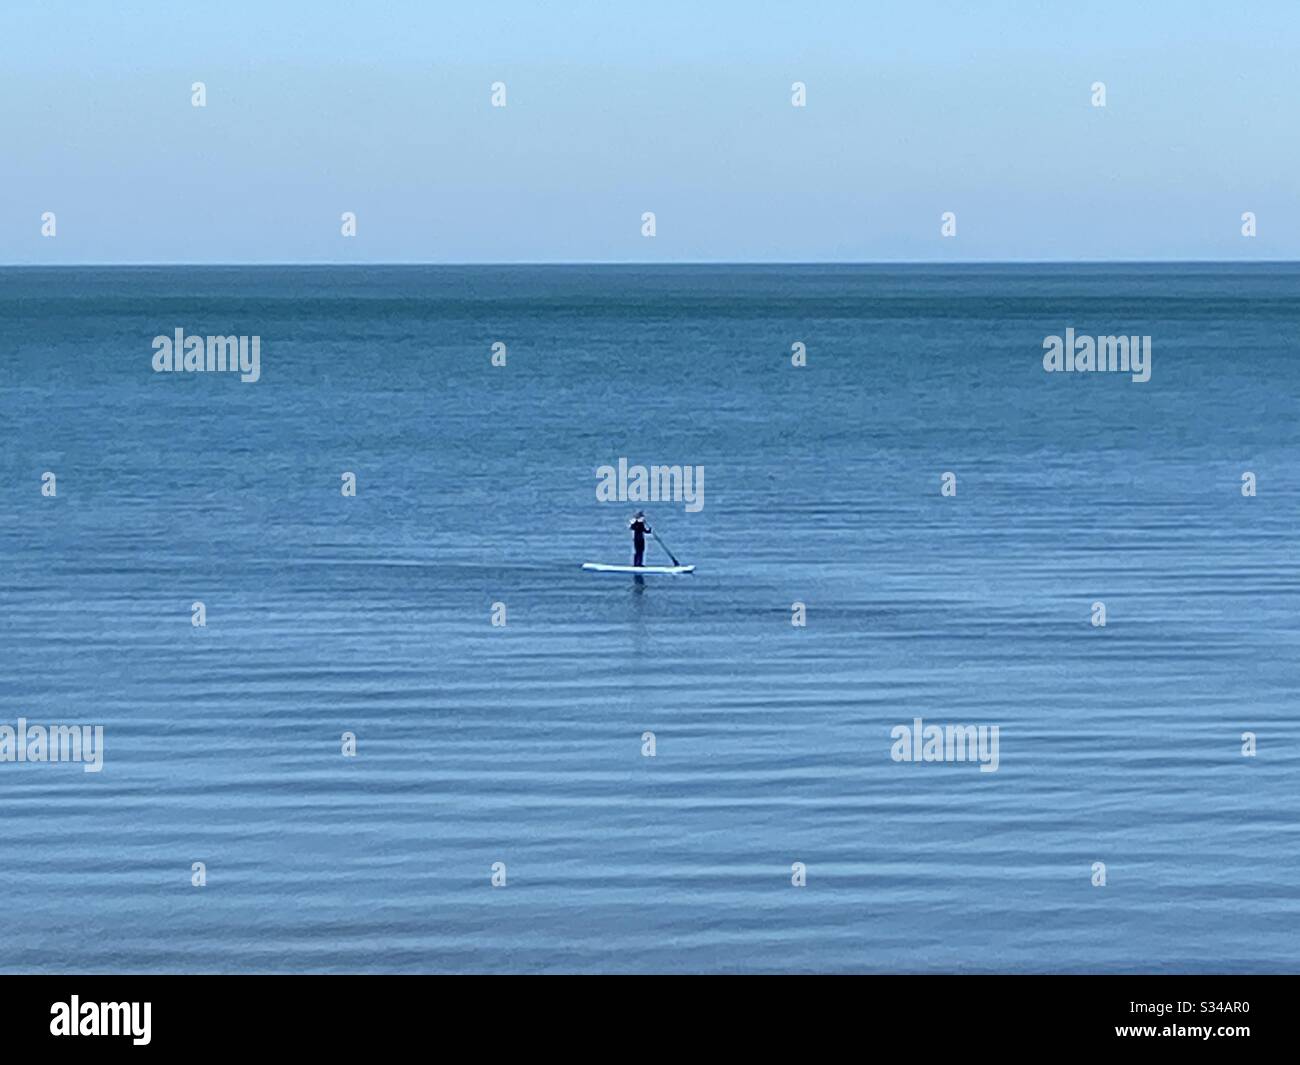 Aberystwyth, West Wales, UK. Sunday 22nd March 2020. News: A warm and sunny afternoon, a person is seen paddleboarding on Mothering Sunday, the sea is calm and peaceful.©️Rose Voon/Alamy Live News Stock Photo